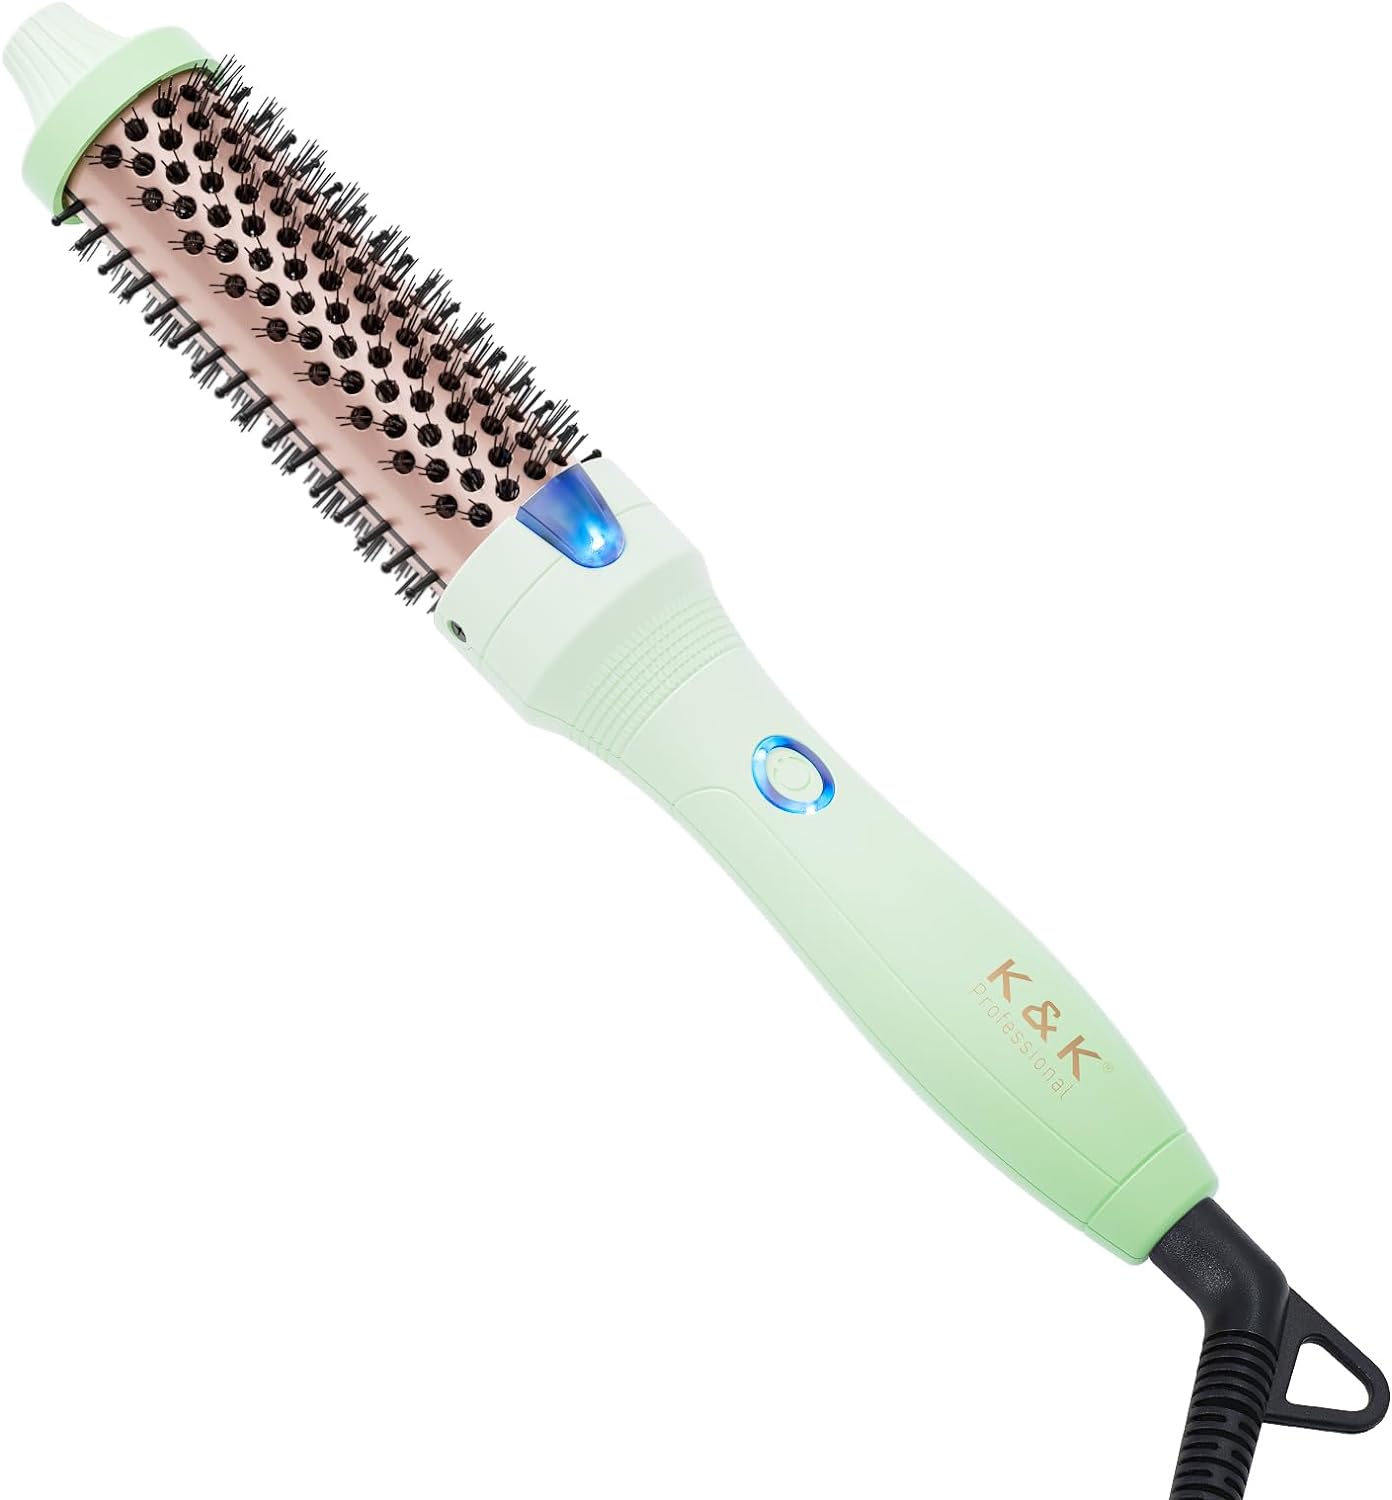 Excellent product:- Very well-made and packaged. Not junky at all- Holds hair but doesnt tangle it (I have shoulder length).- Much better than old type curling irons that dont grasp hair.- note that it is not a blow dryer  but heats up fast to create curls in dry hair. Curls in my hair come out smooth not frizzy.- Has NO creepy chemical smells I return all products that do smell.- So good I bought a 1.5 inch to accompany the 1.25 inch. Ill use the diff size ones according to size curl I wan